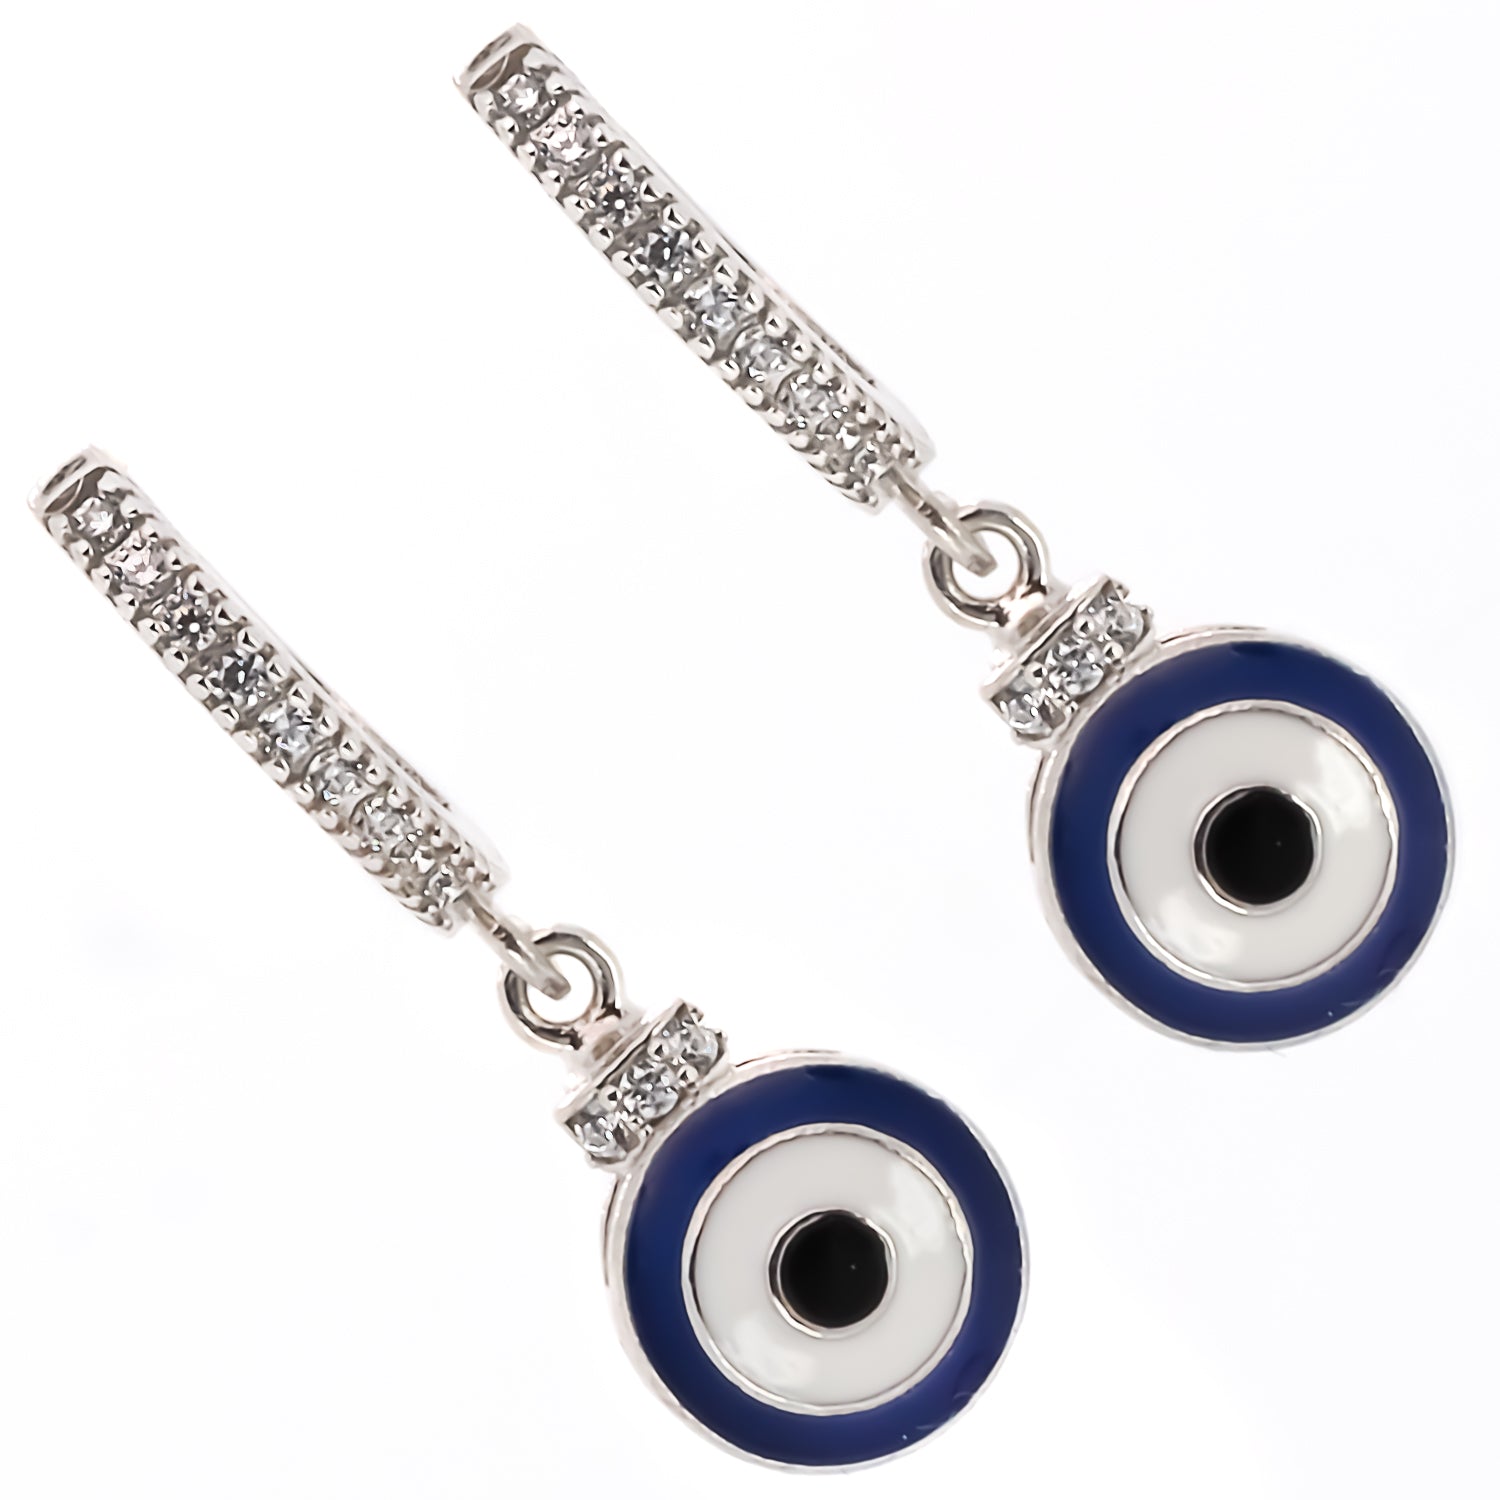 Eye-catching Blue Evil Eye Sterling Silver Earrings with intricate details